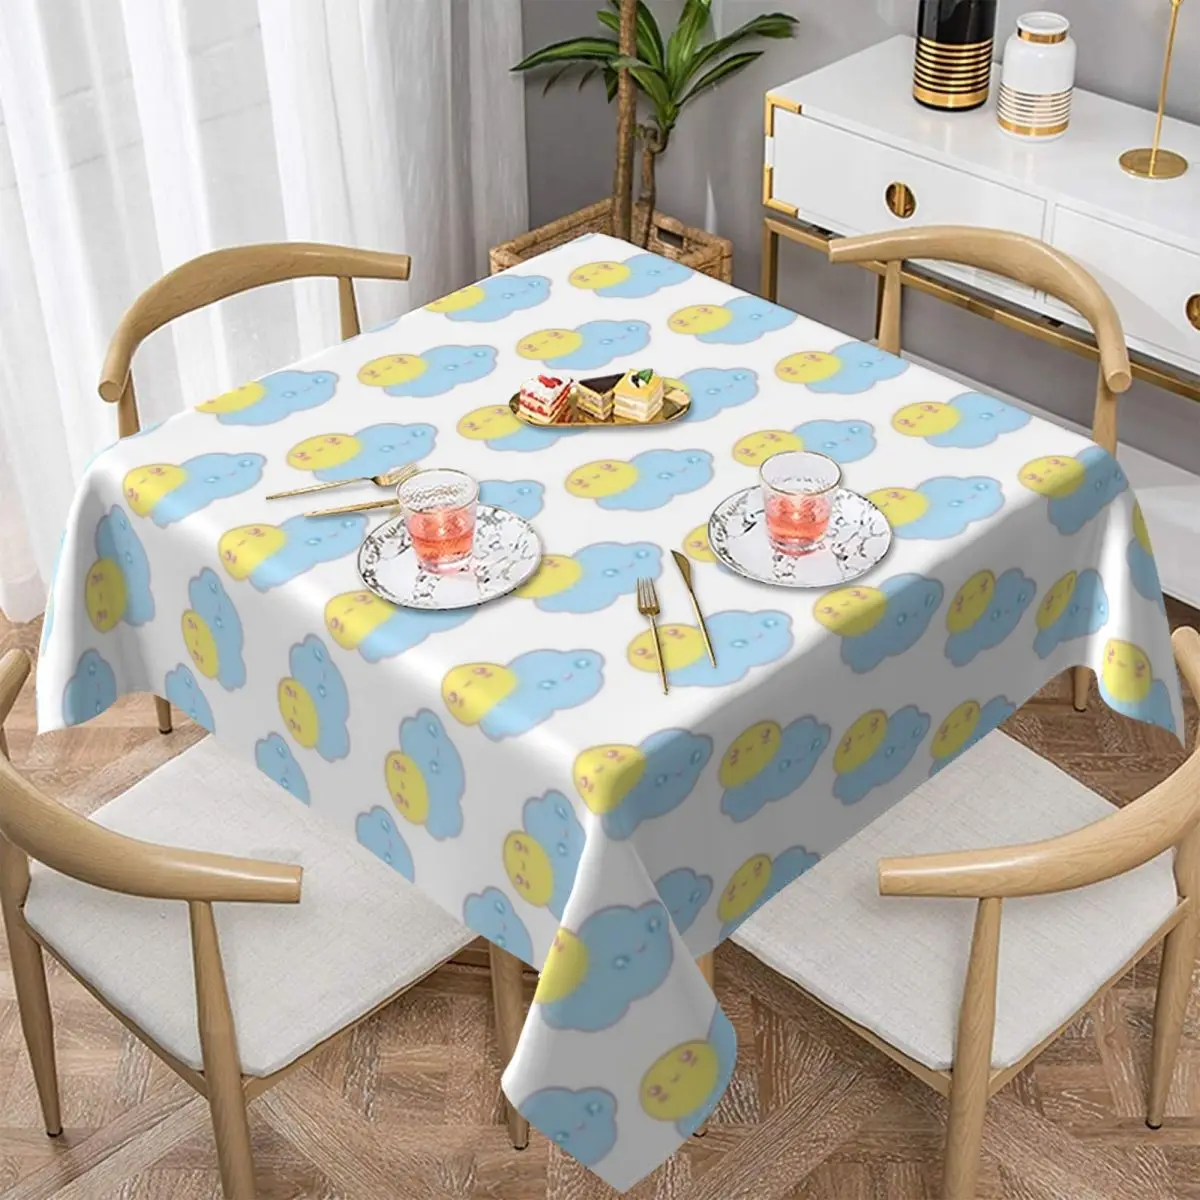 

Cloud Tablecloth Cheap Decorative Table Cover Wedding Printed Protection Polyester Table Cloth